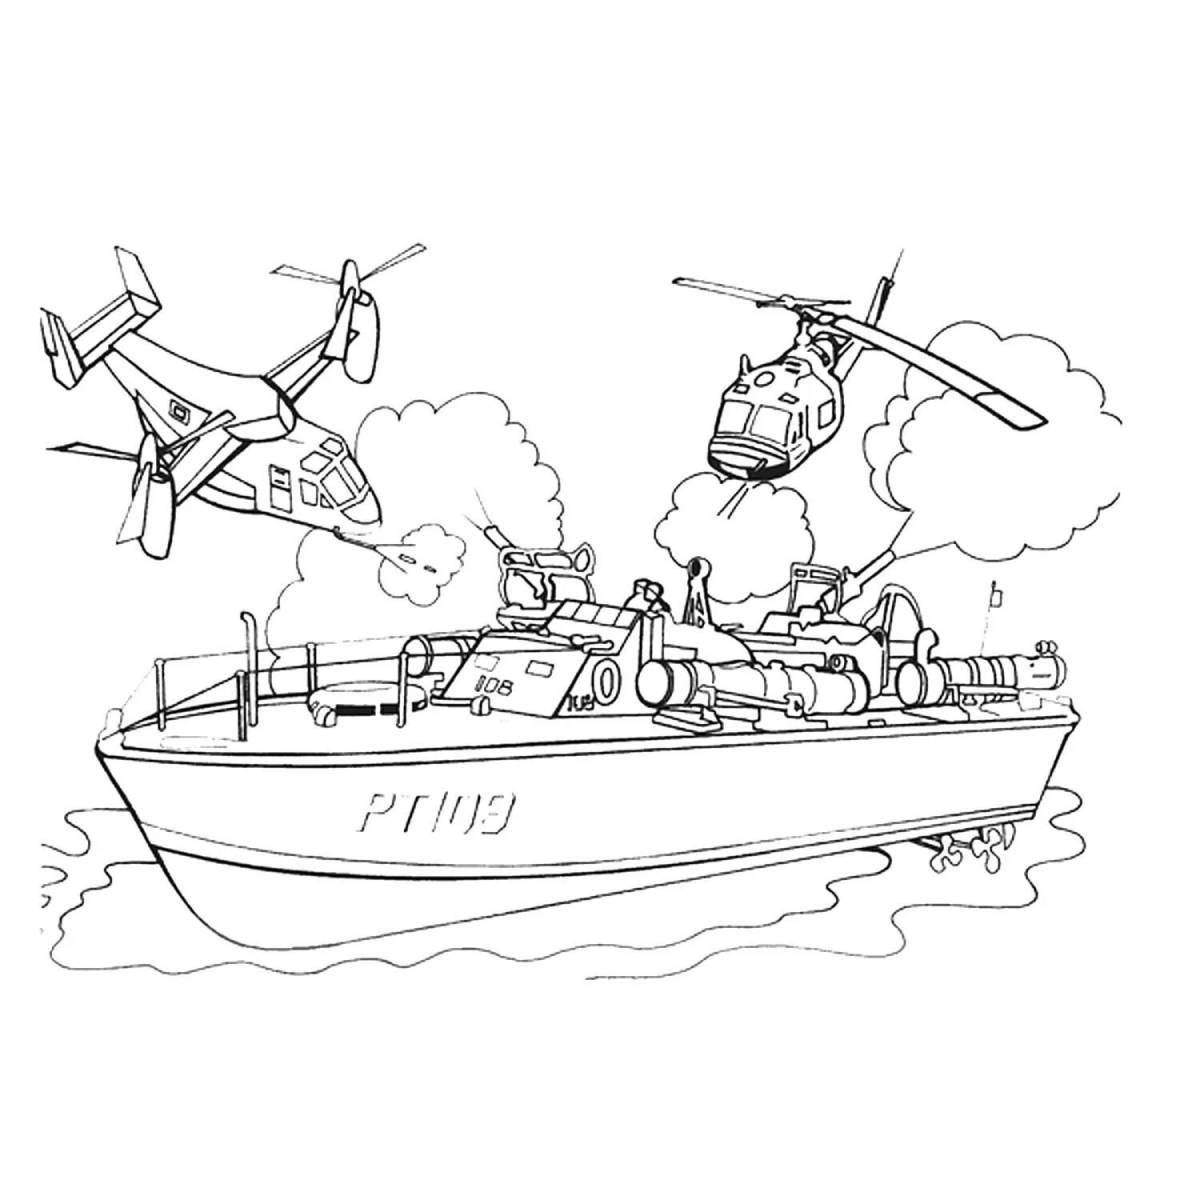 Attractive warship coloring book for boys